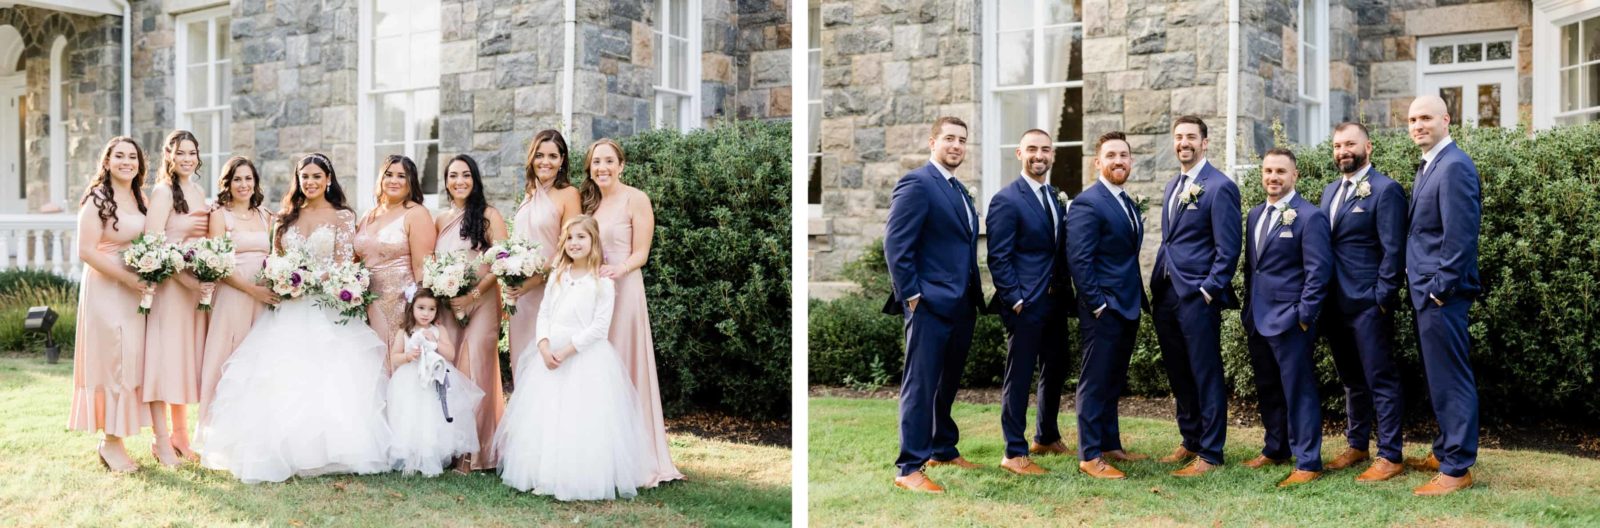 Wedding party photos in the front lawn with ladies wearing blush and the man in navy suits